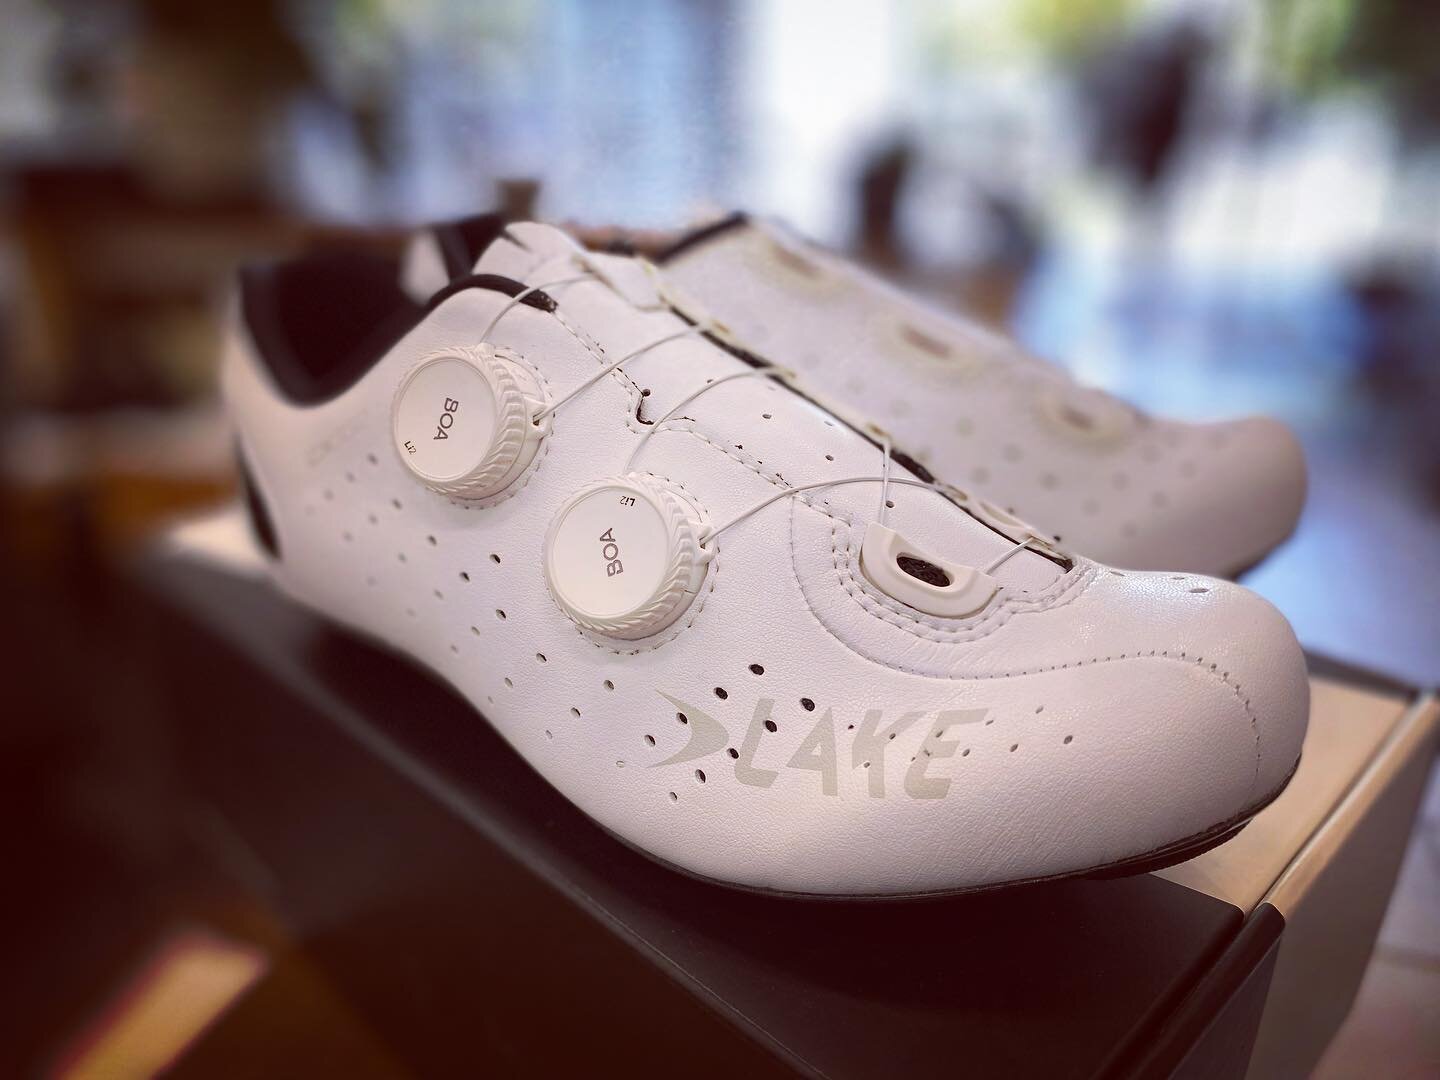 The new white on white CX332 from @lakecycling 

You can never have too much white on the cycling shoes!! #lakecycling #cyclingshoes